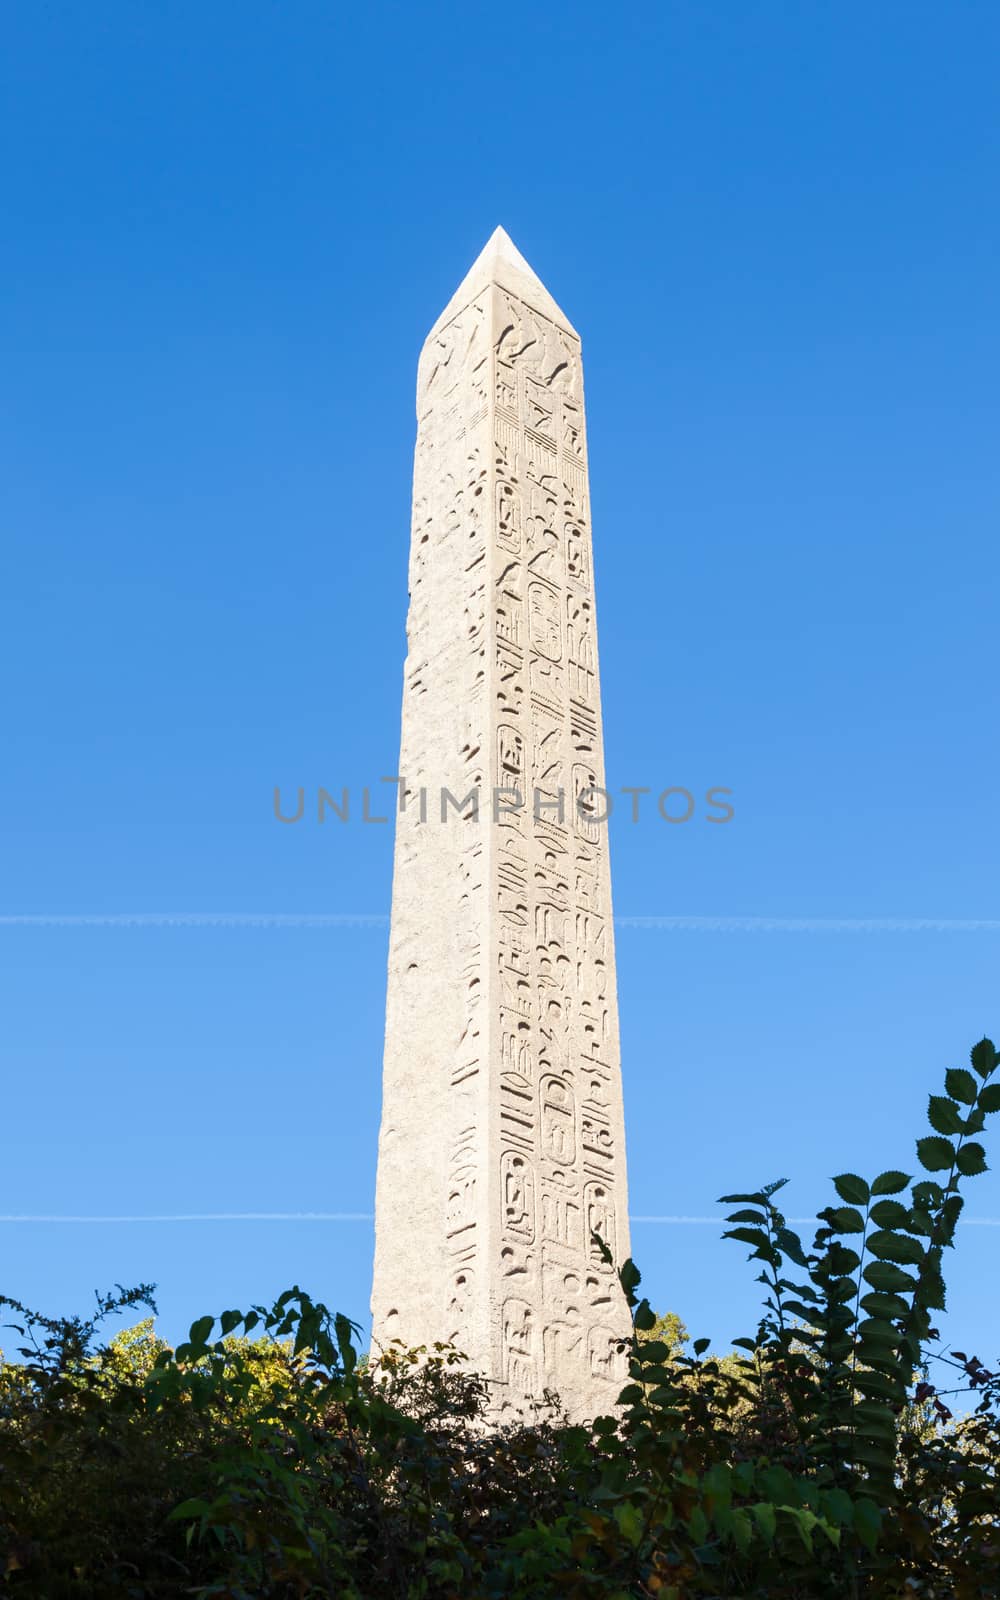 Cleopatra's Needle is an Egyptian obelisk located in Central Park, New York City in the United States of America.